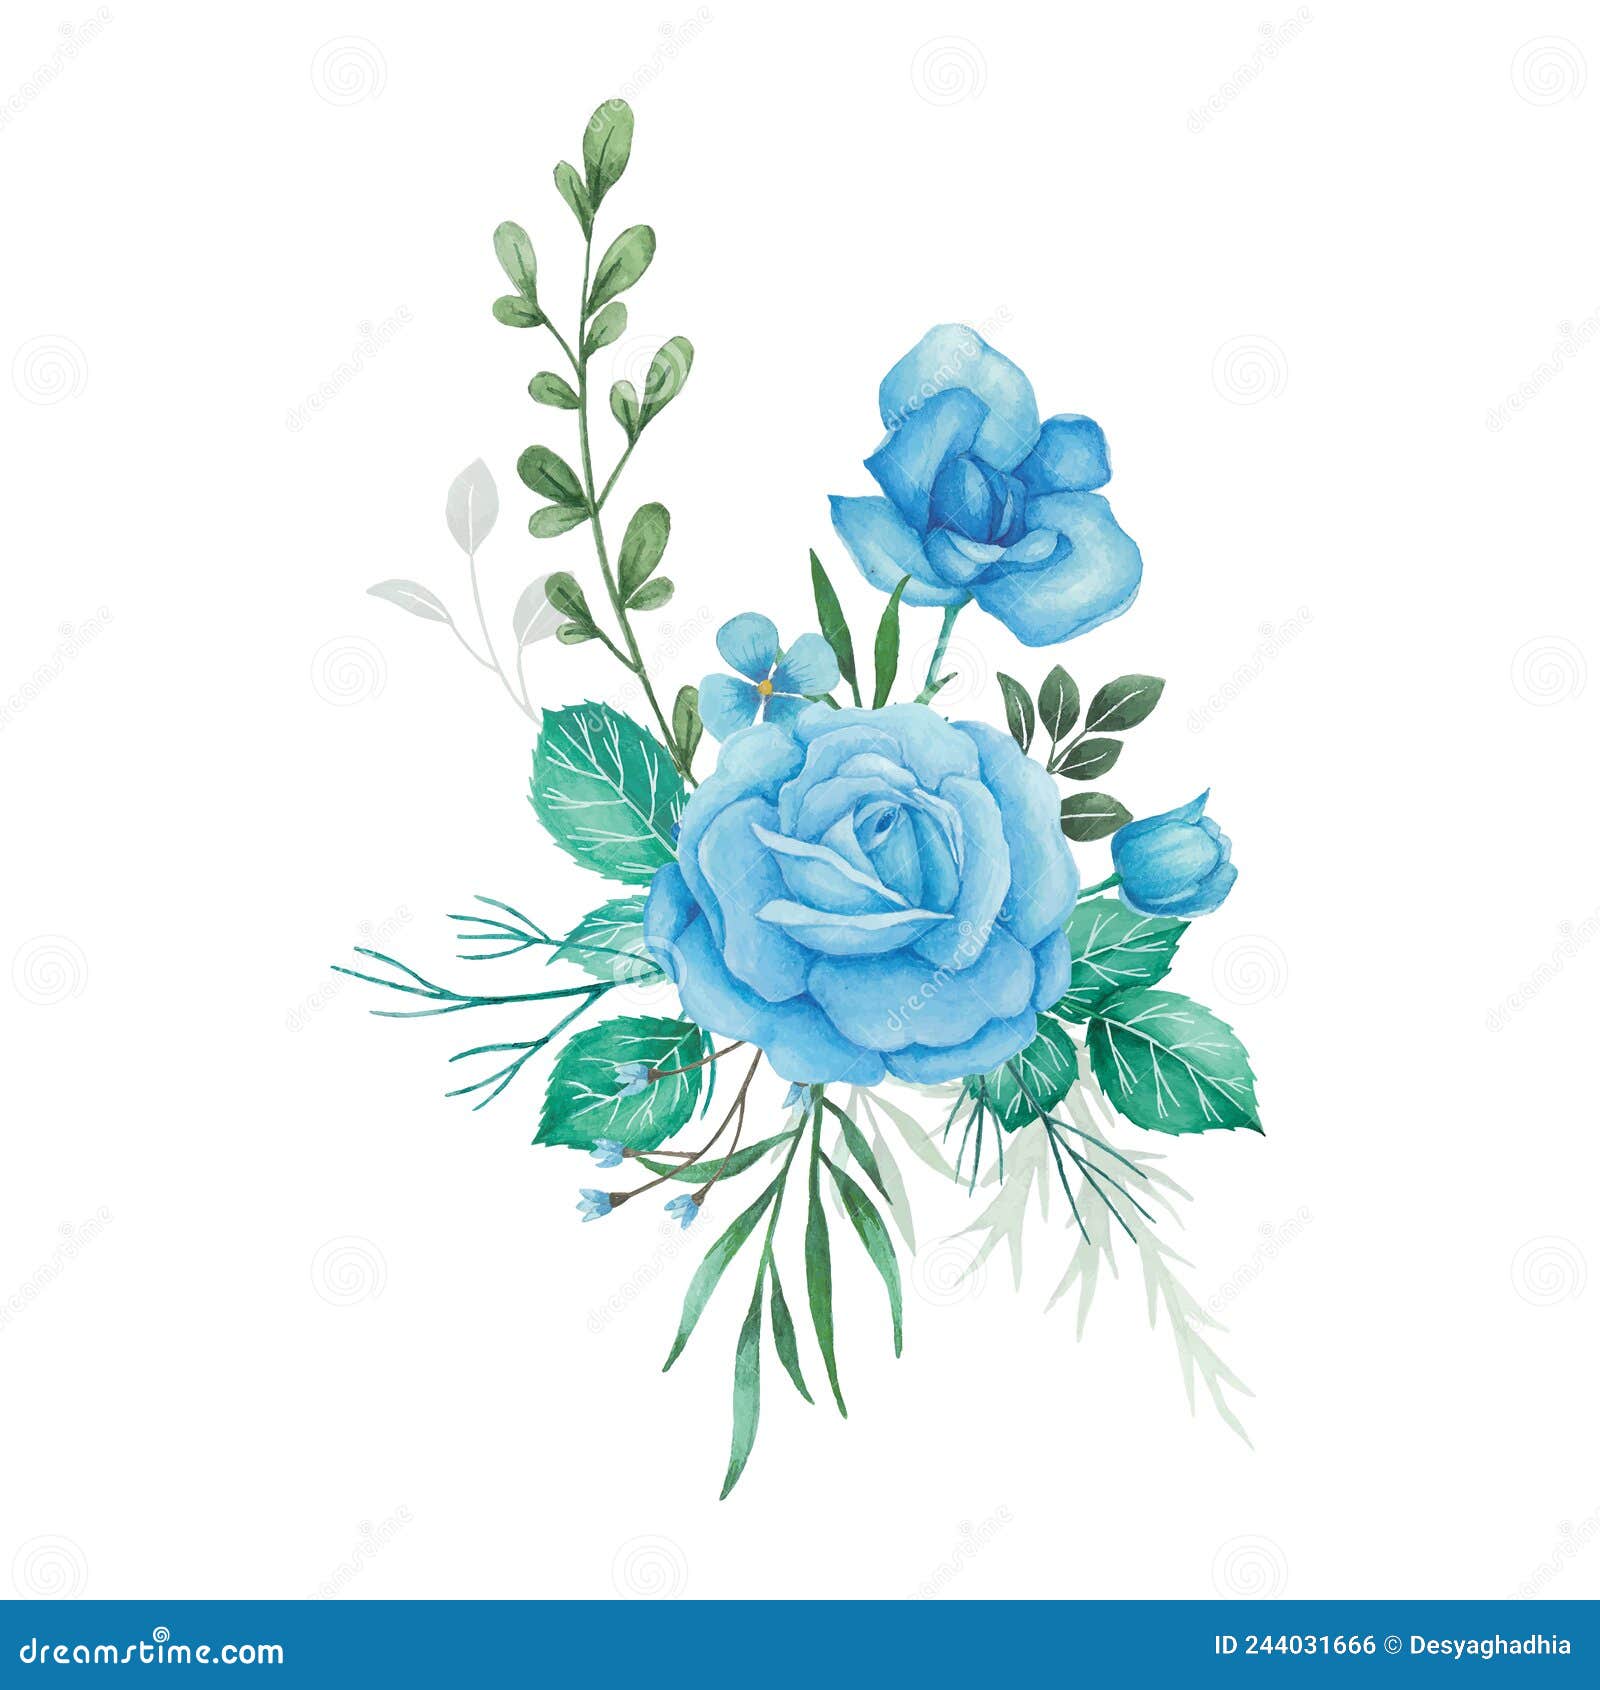 watercolor flowers bouquet and arrangement with blue roses and green leaves